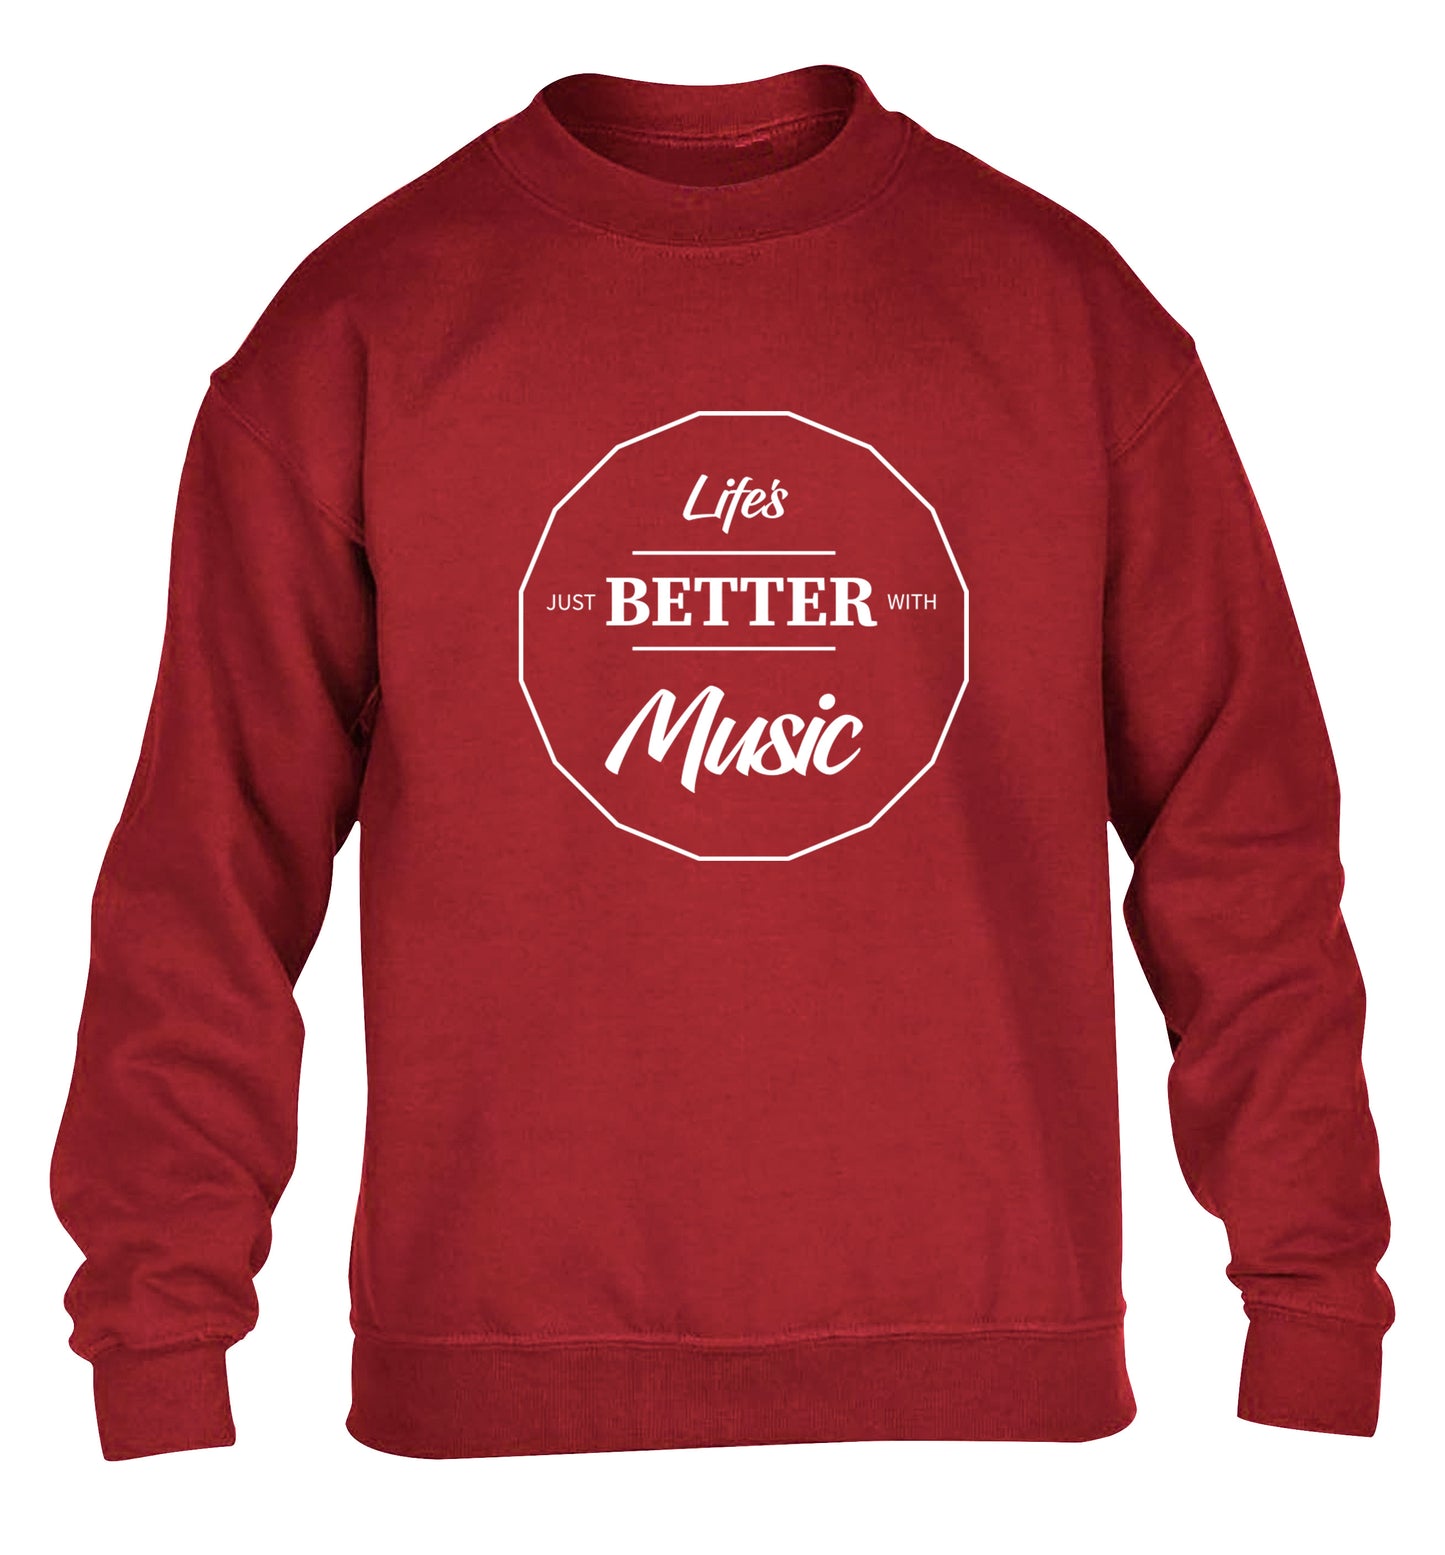 Life is Better With Music children's grey sweater 12-13 Years